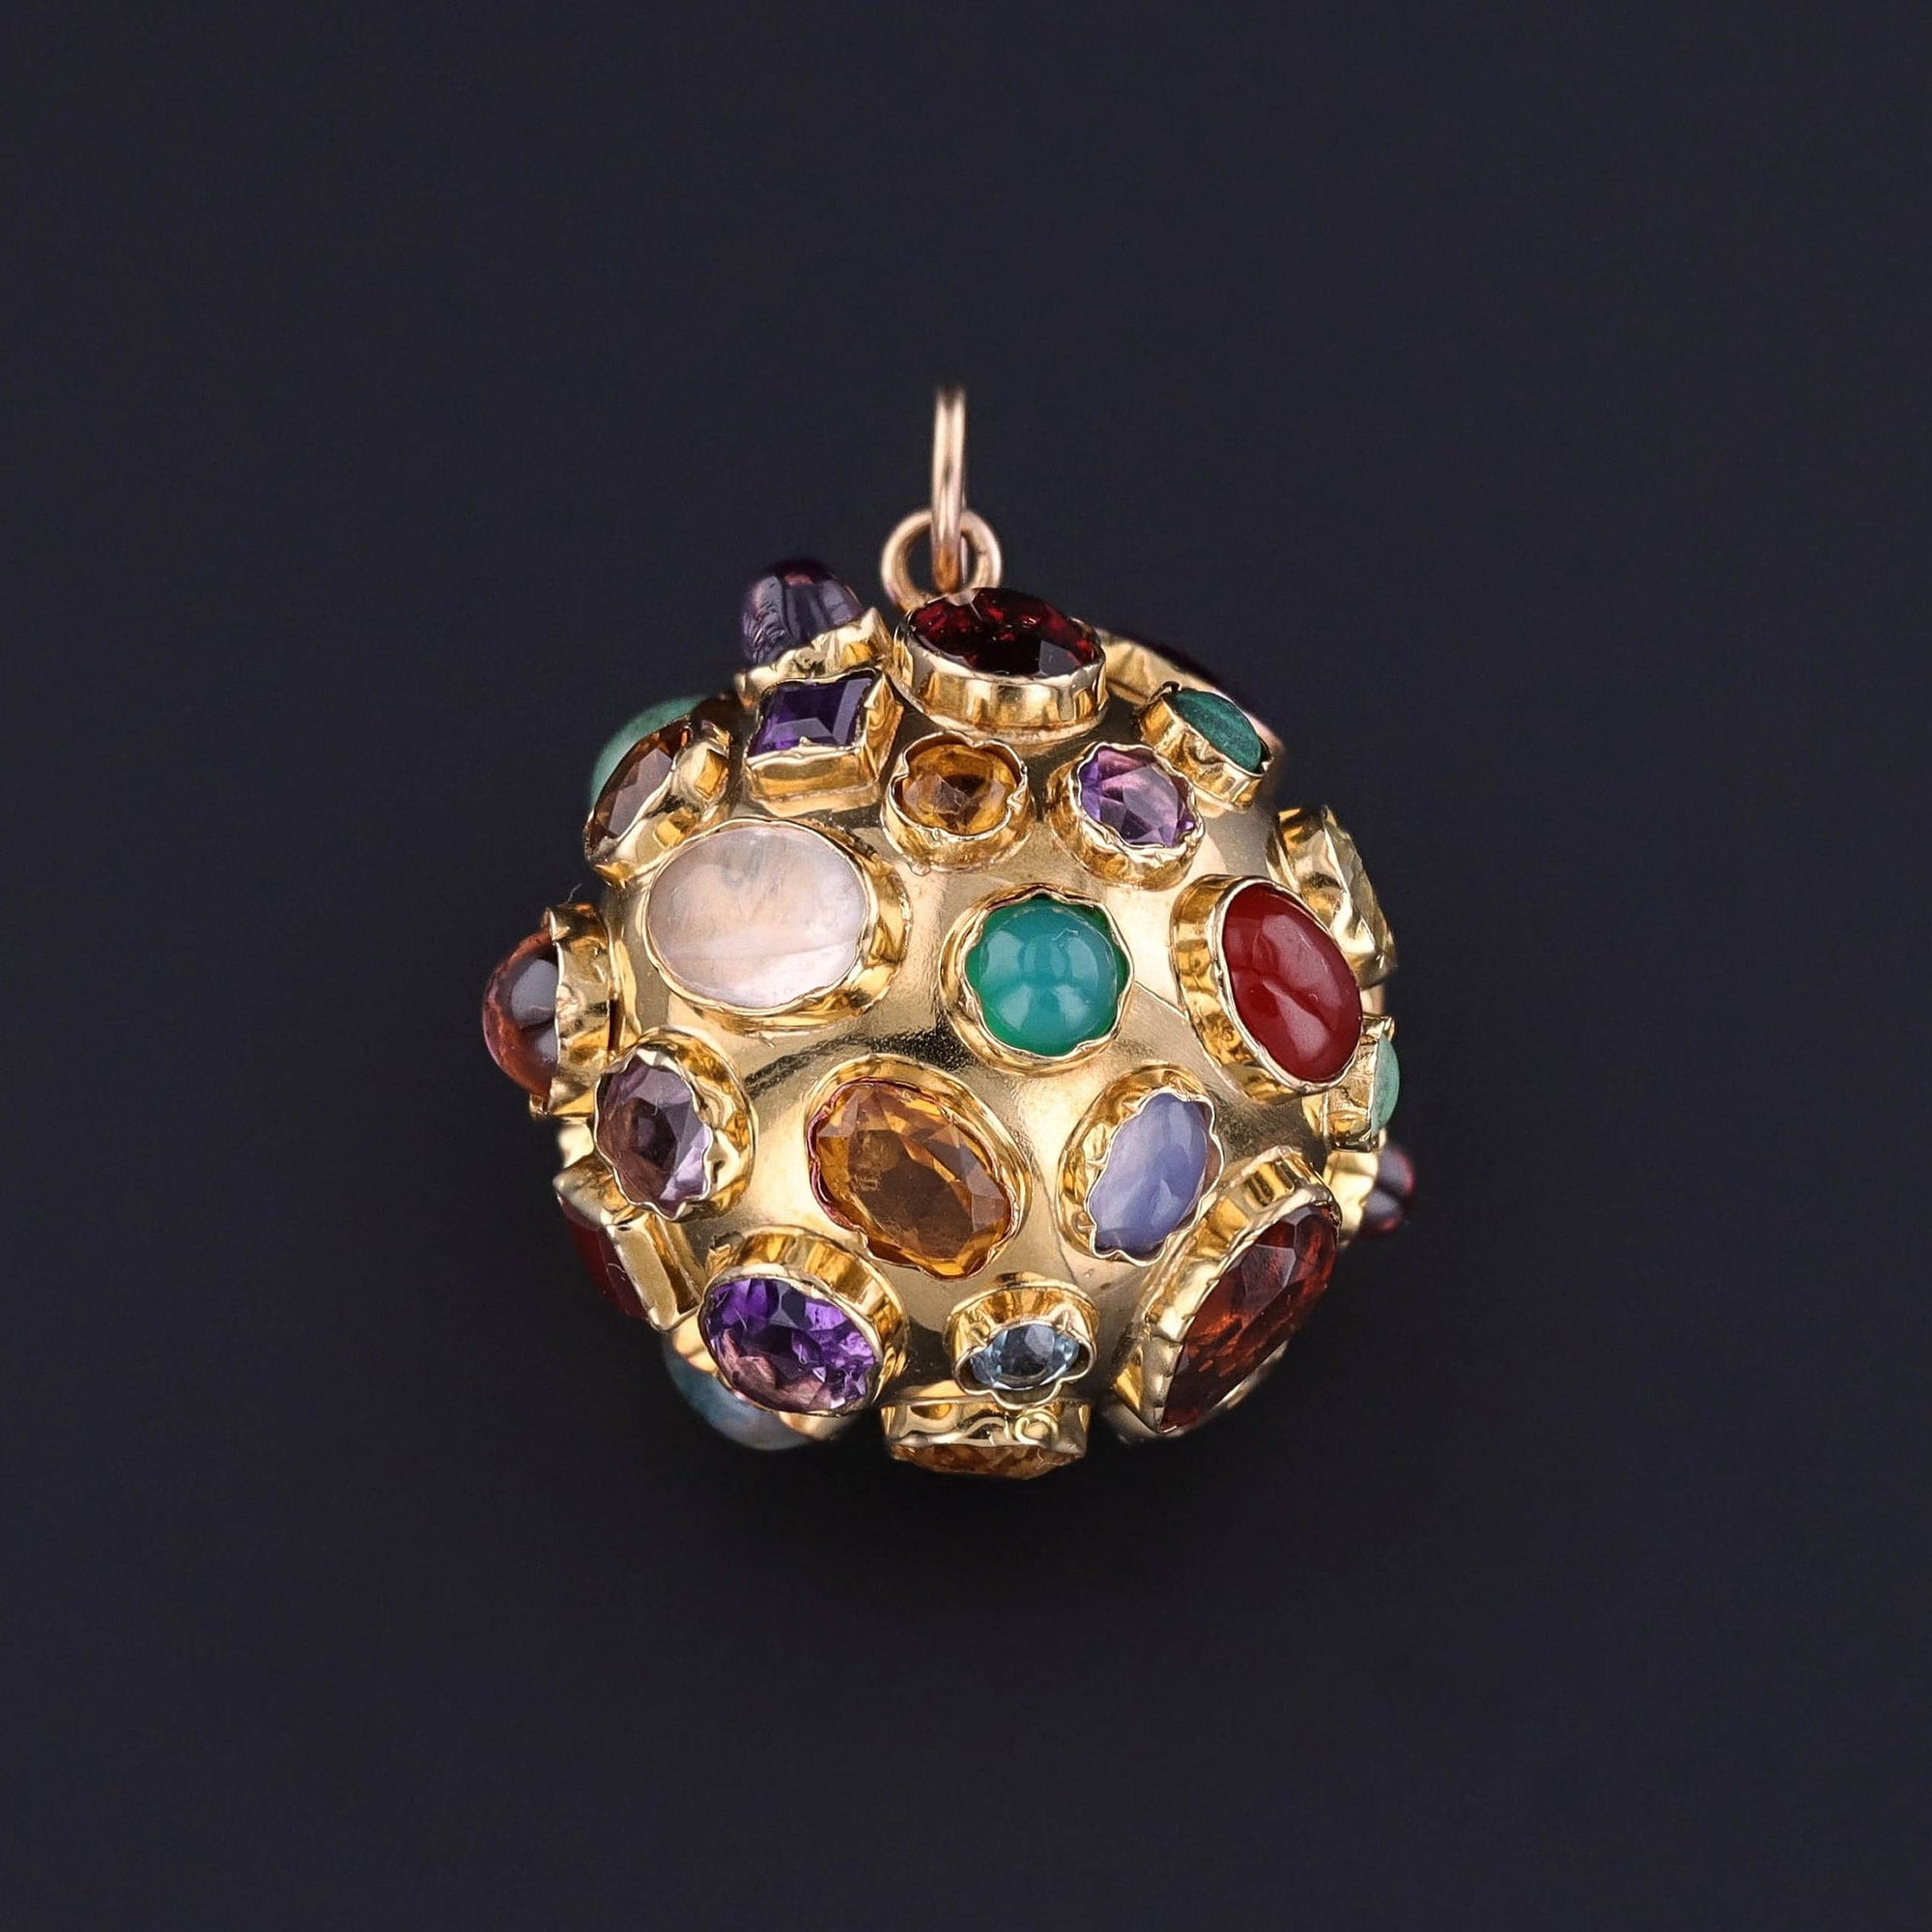 An 18k Gold and gemstone sputnik pendant from the 1960s. The vintage piece is quite large for a sputnik and in great condition. Perfect for any mid-century jewelry collector or vintage jewelry lover.